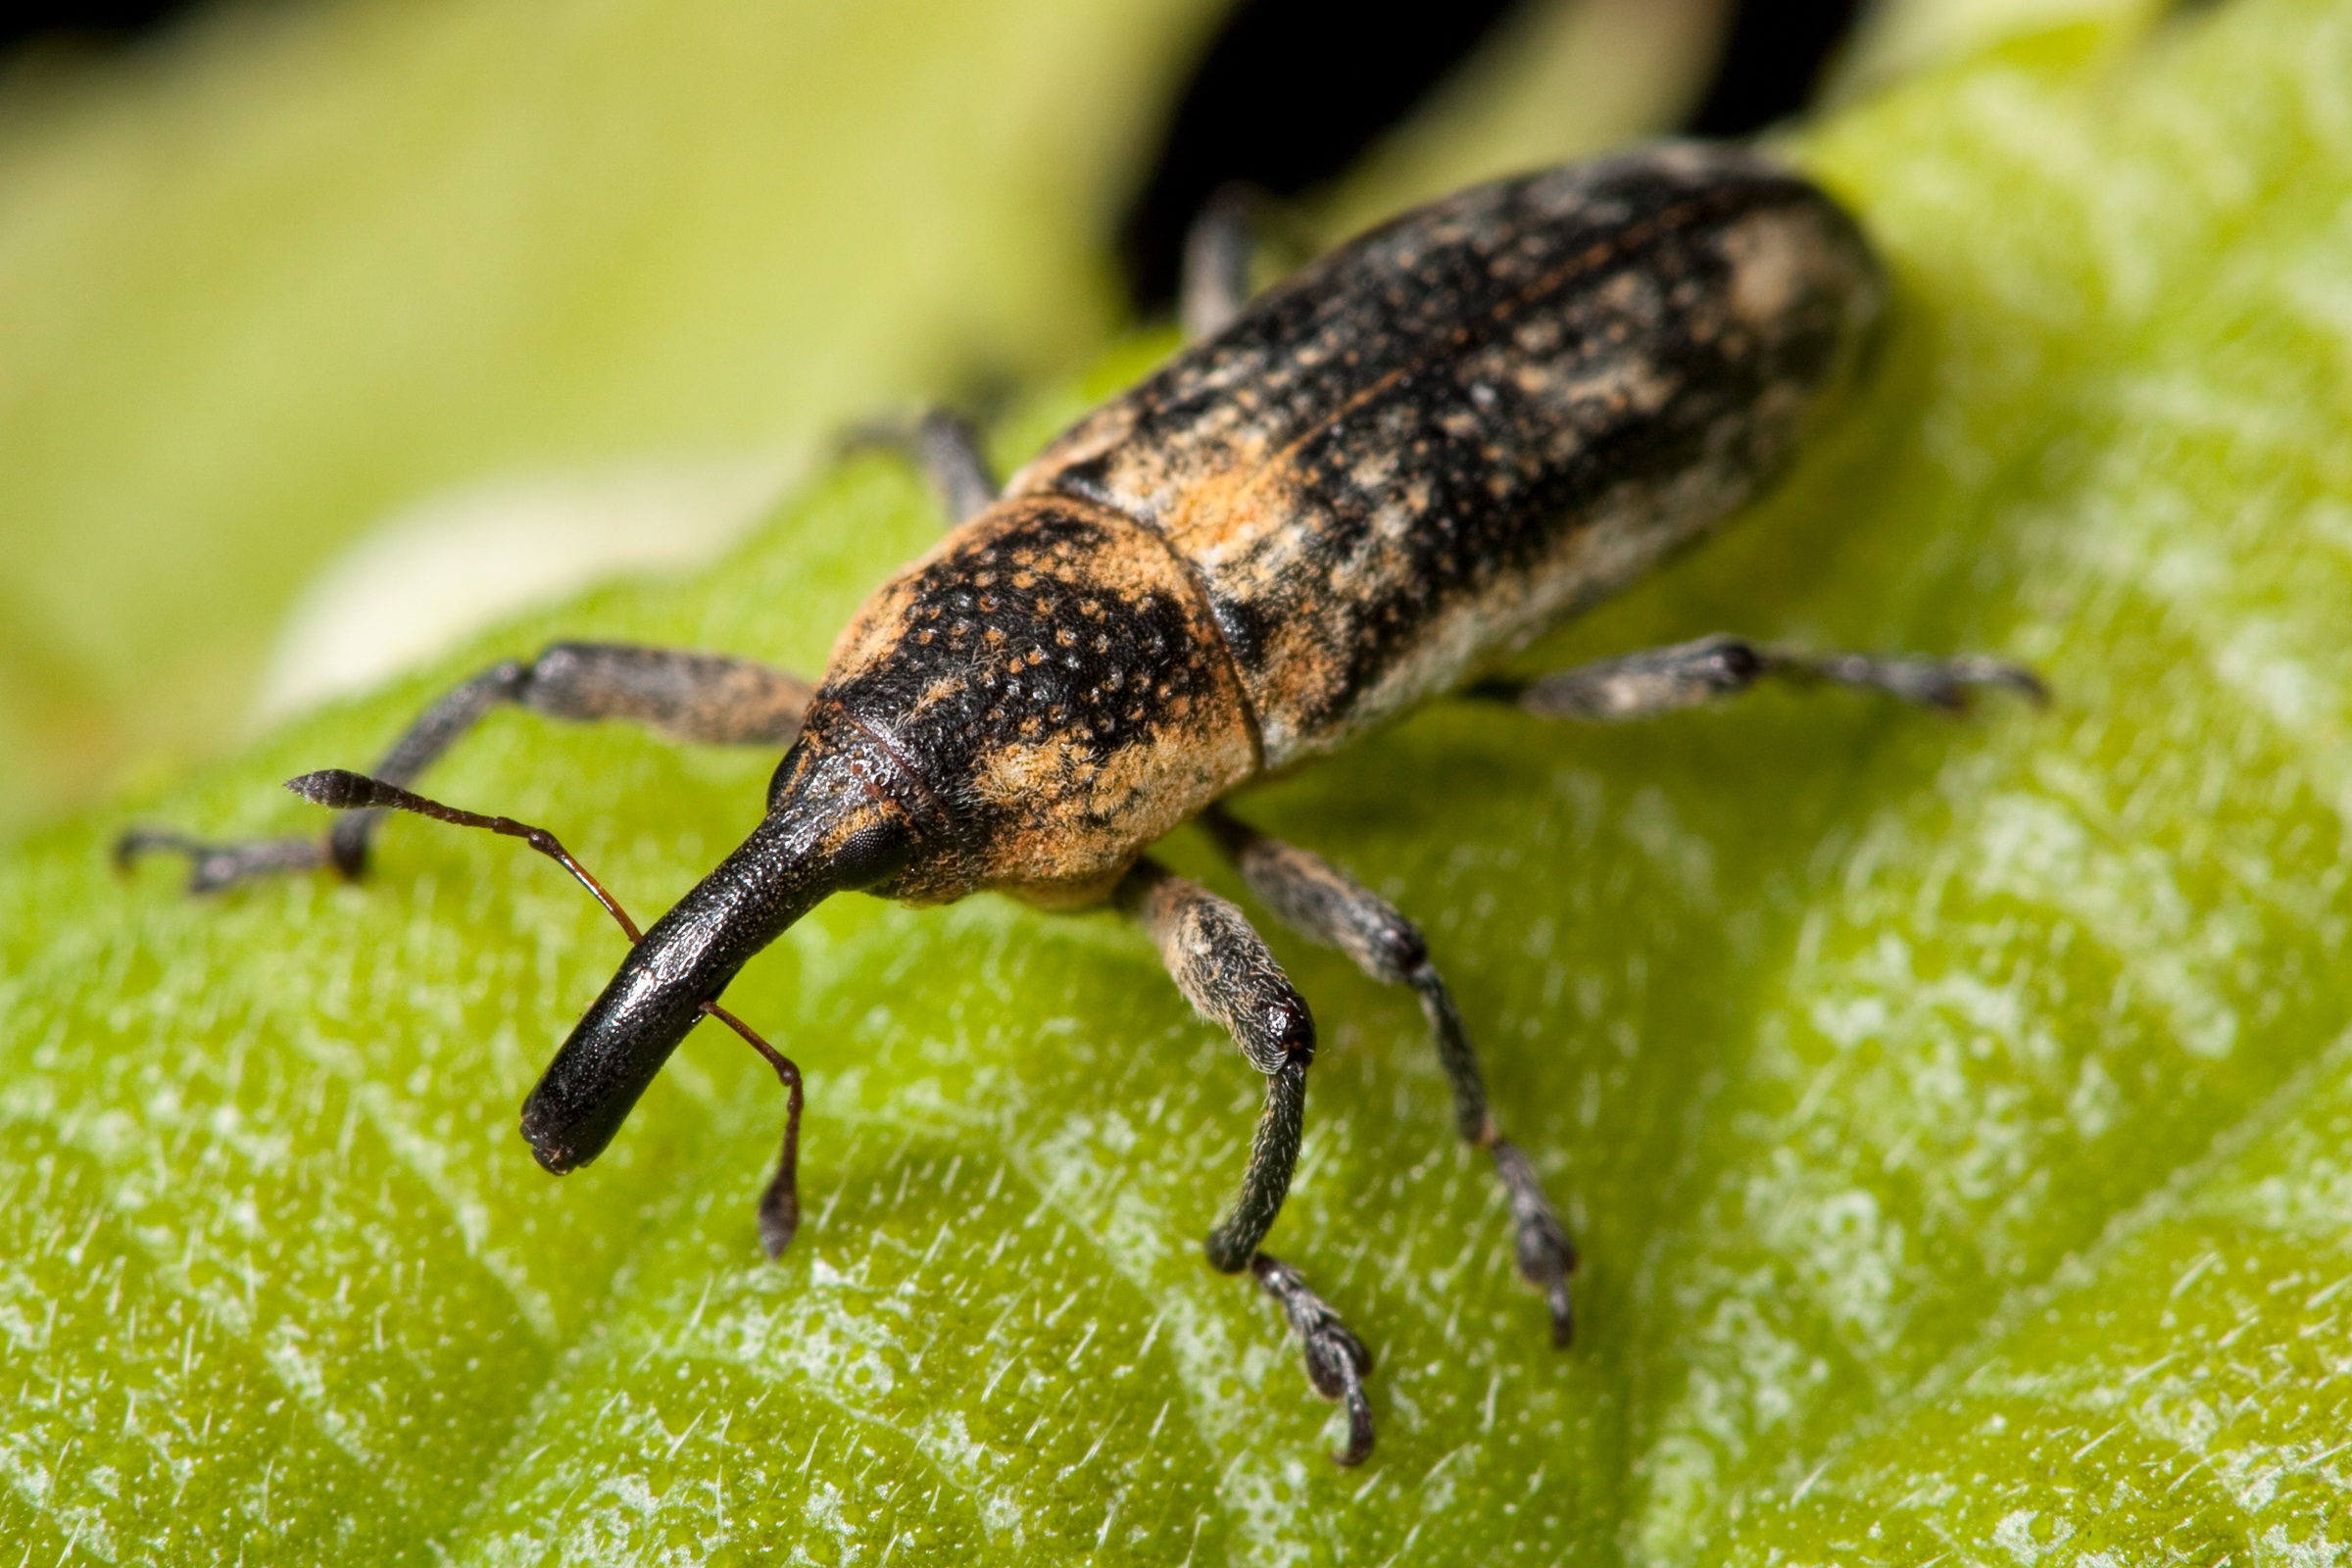 Weevil on the Plant, Animal, Insect, Nature, Plant, HQ Photo